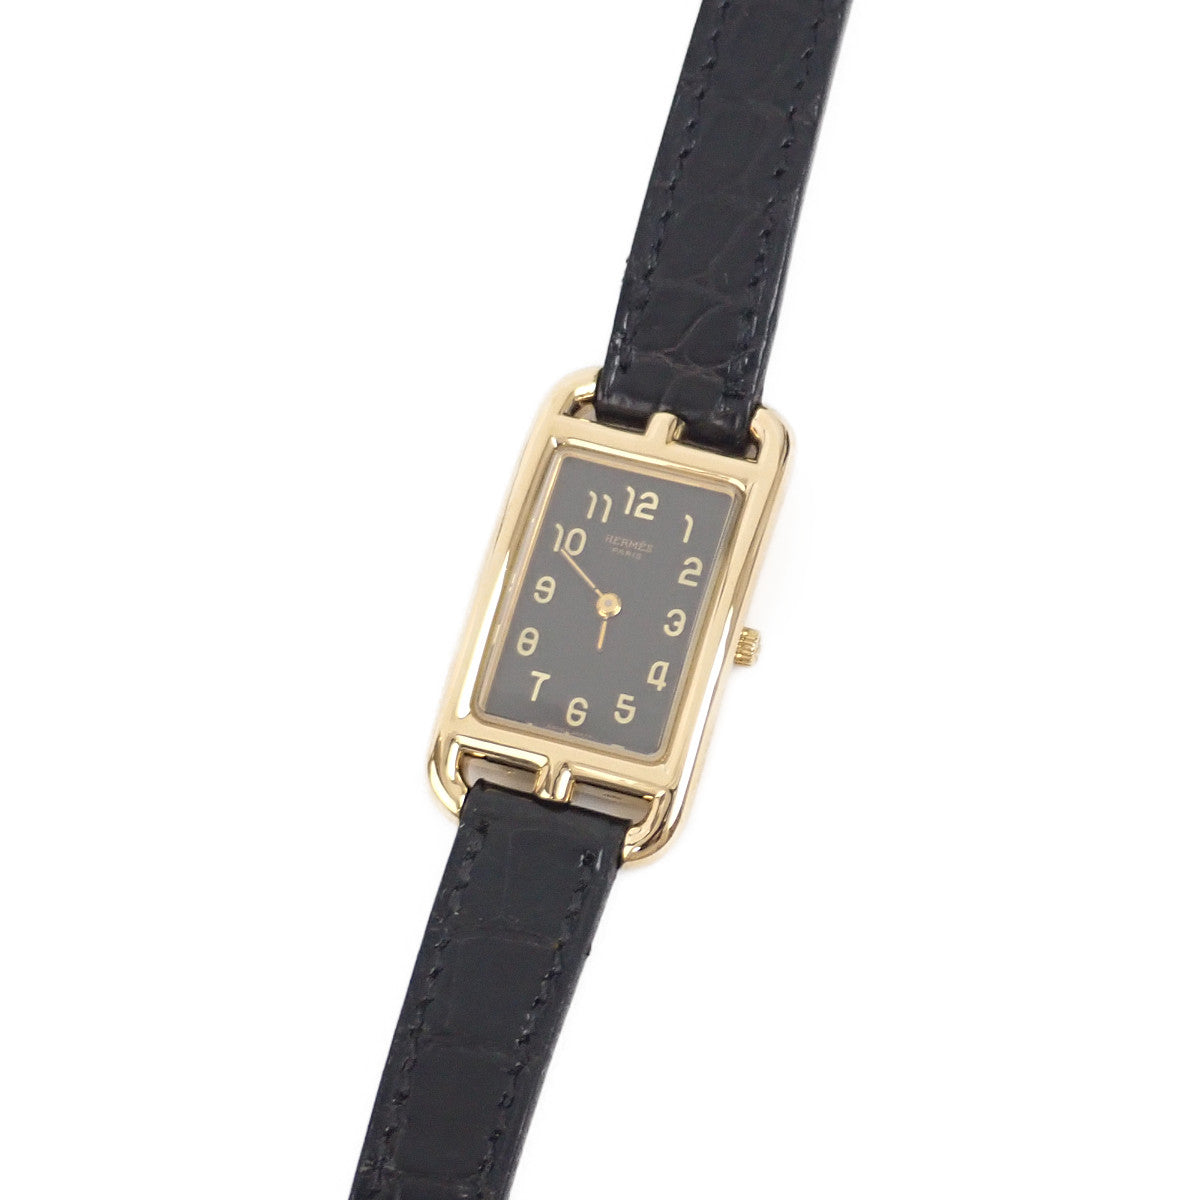 HERMES Nantucket Polosus Women's Wristwatch NA1.285, Black Dial, 18K Yellow Gold/Leather, HERMES Used NA1.285